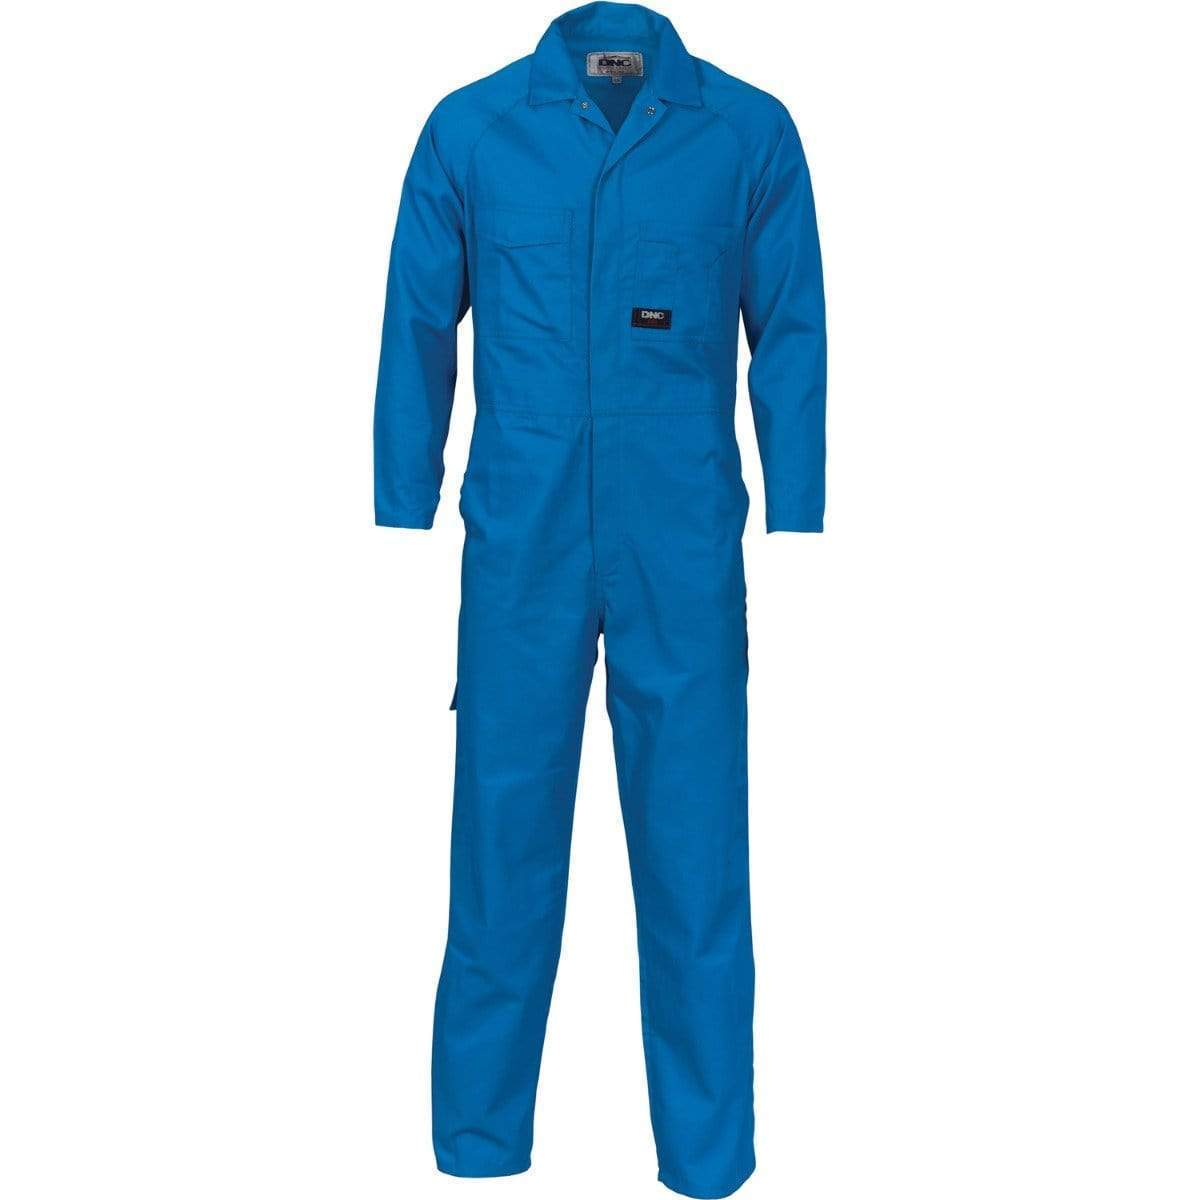 DNC Workwear Work Wear DNC WORKWEAR 200 GSM Polyester Cotton Coverall 3102